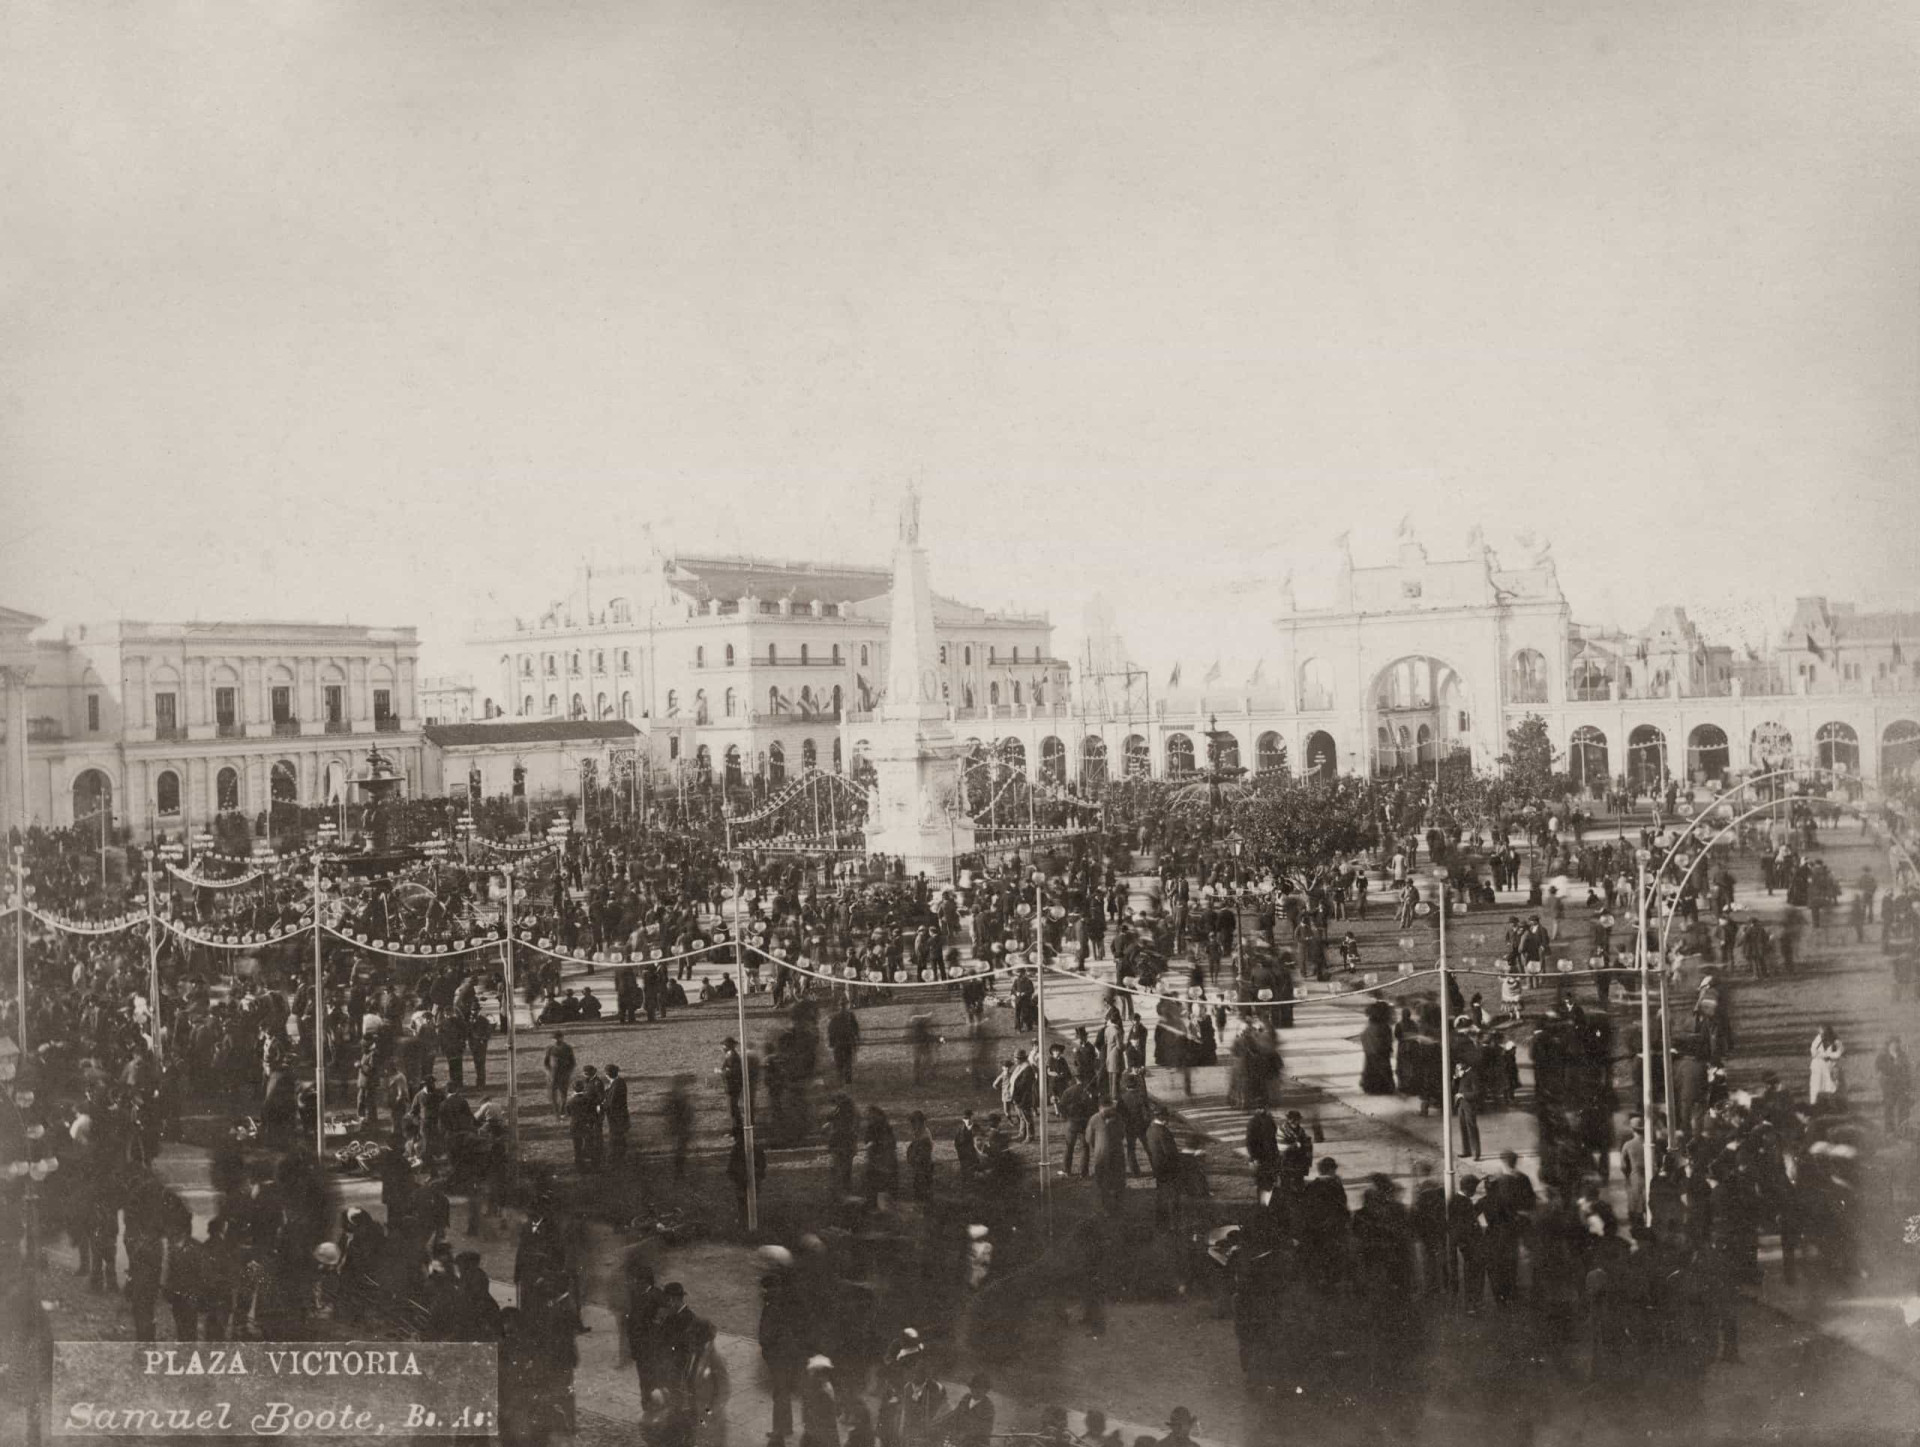 Taken circa 1880, crowds swarm round Plaza de la Victoria in the Argentinian capital.<p><a href="https://www.msn.com/en-us/community/channel/vid-7xx8mnucu55yw63we9va2gwr7uihbxwc68fxqp25x6tg4ftibpra?cvid=94631541bc0f4f89bfd59158d696ad7e">Follow us and access great exclusive content every day</a></p>